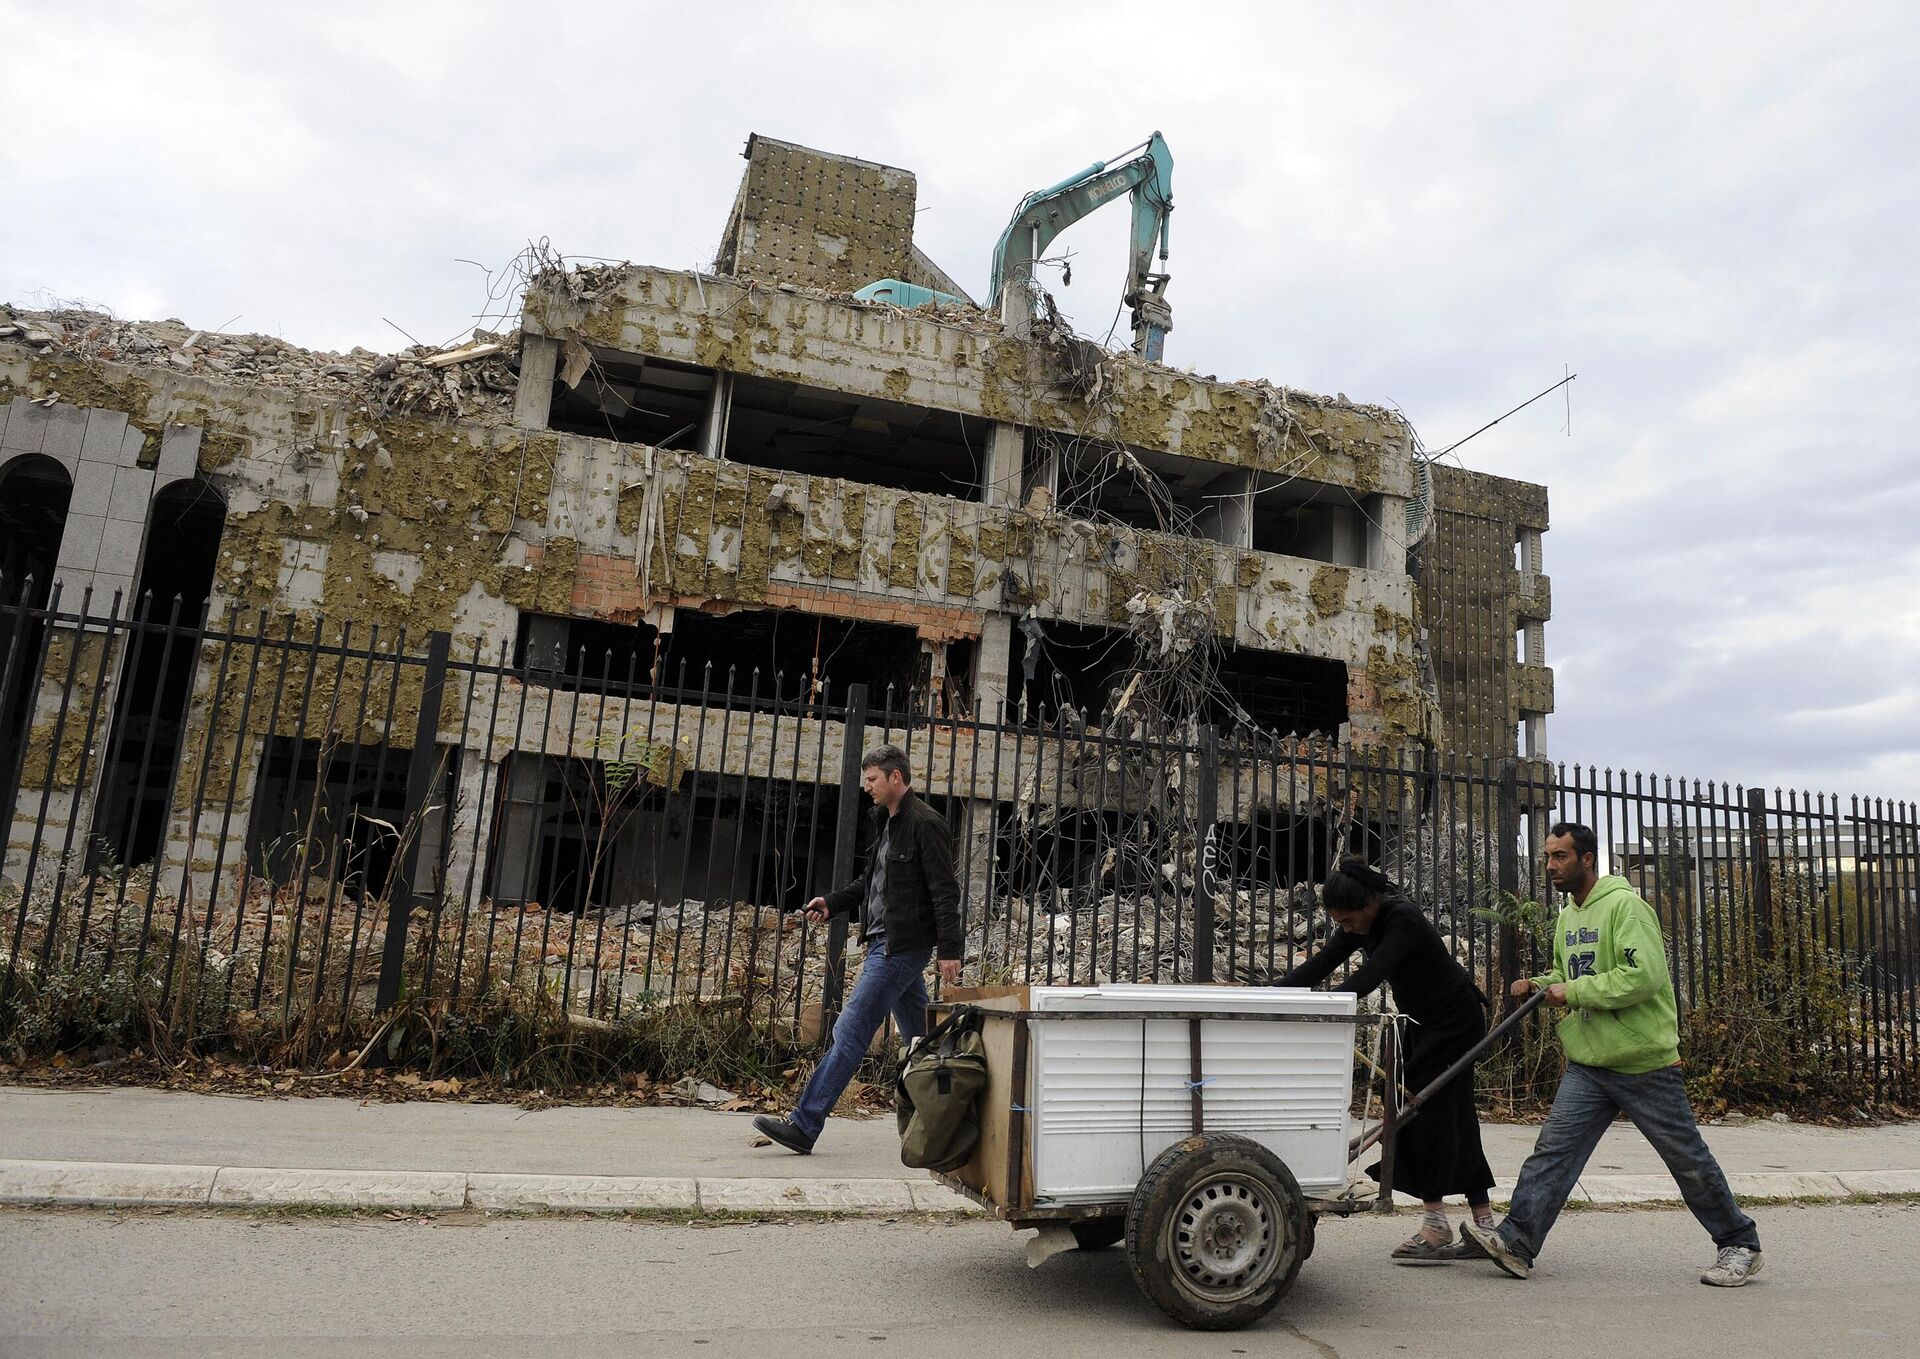 Pedestrians walk past the remains of the former Chinese Embassy in Belgrade, on November 10, 2010. In 1999, the Chinese embassy in Belgrade, was hit and set on fire during NATO airstrikes on the city. Photo: AFP 2023/Andrej Isakovic.